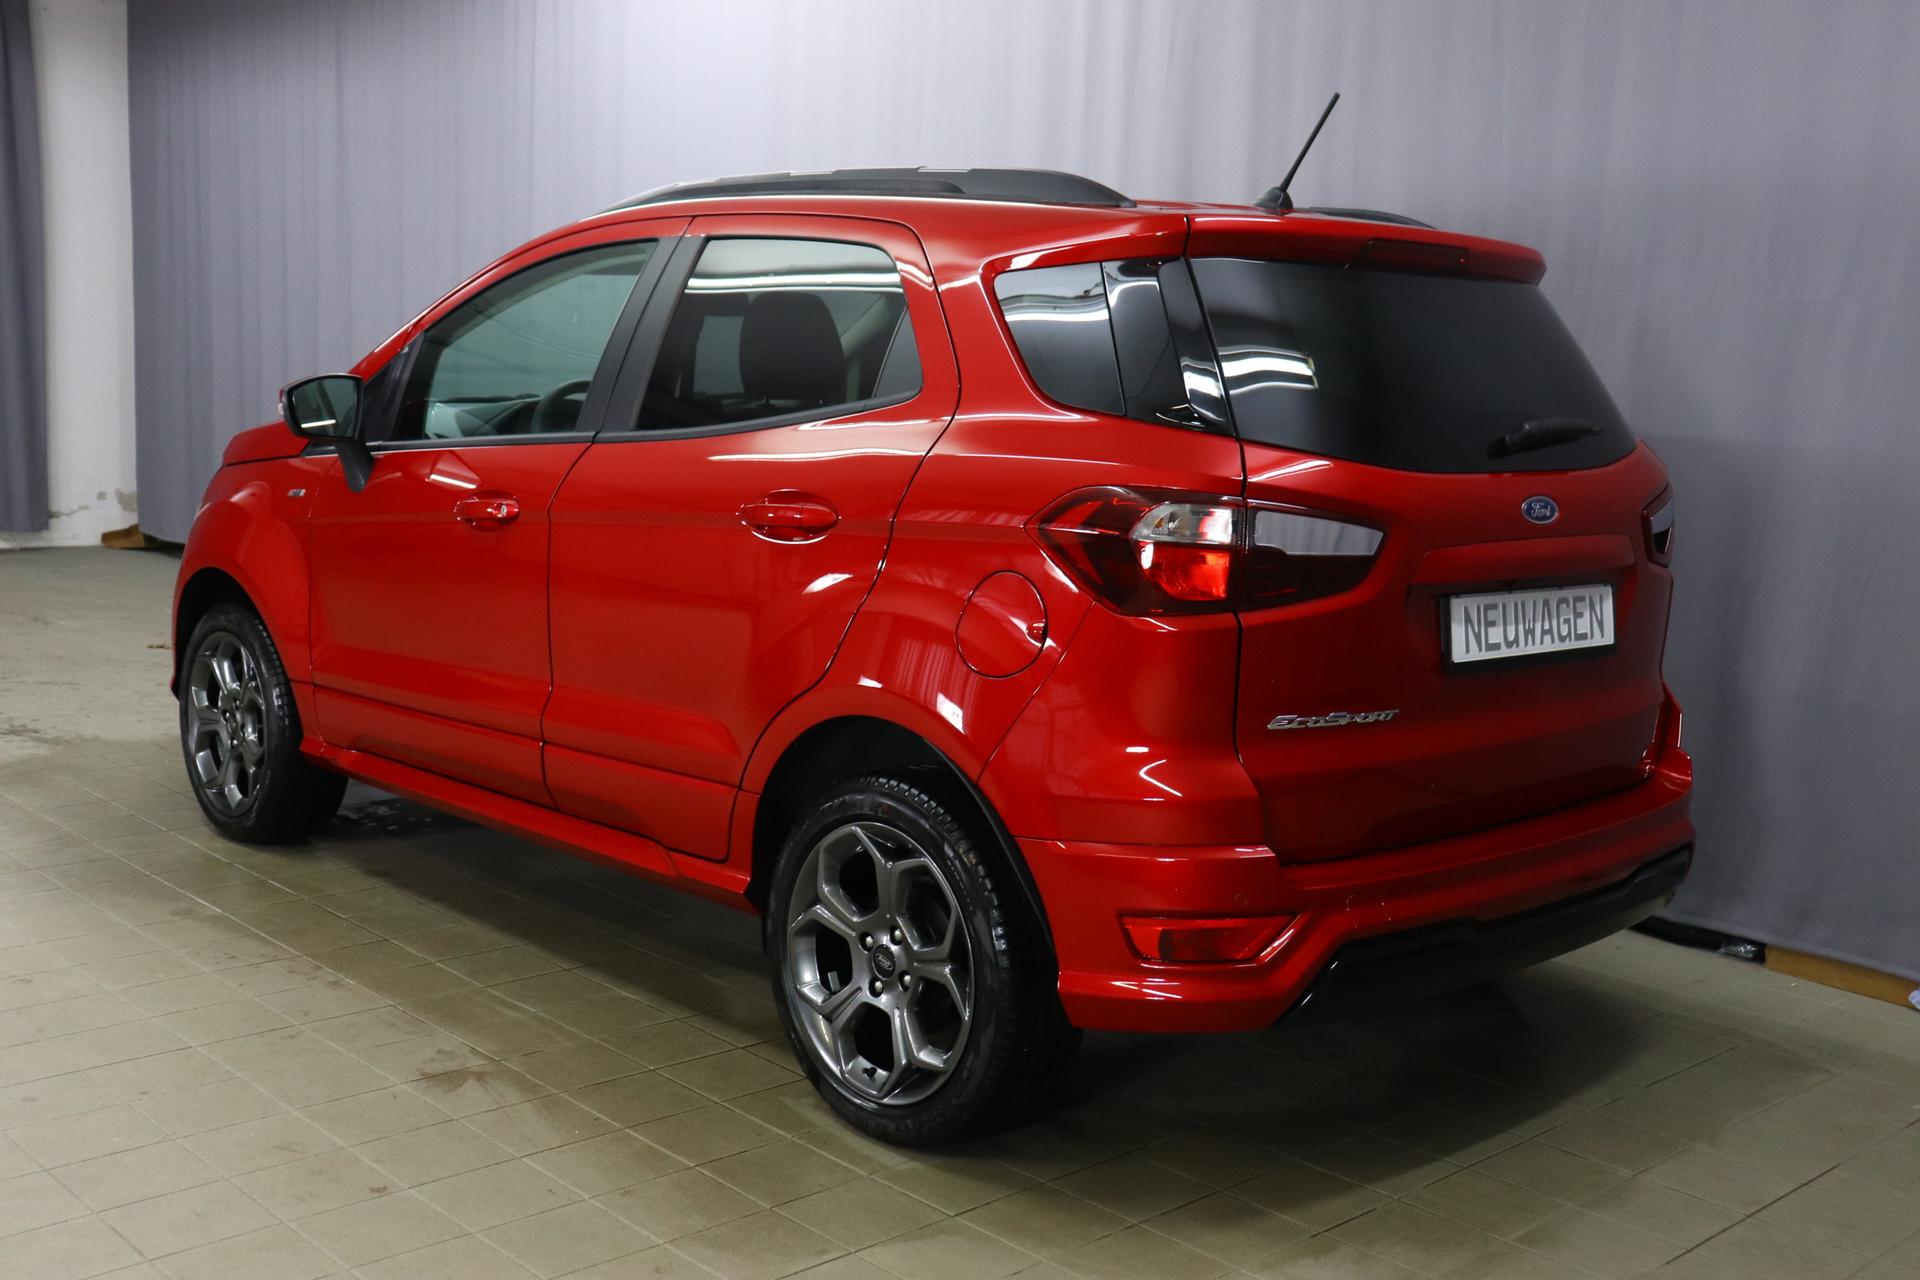 Ford Eco Sport ST-Line 1.0 125PS Fantastic Red Metallic		